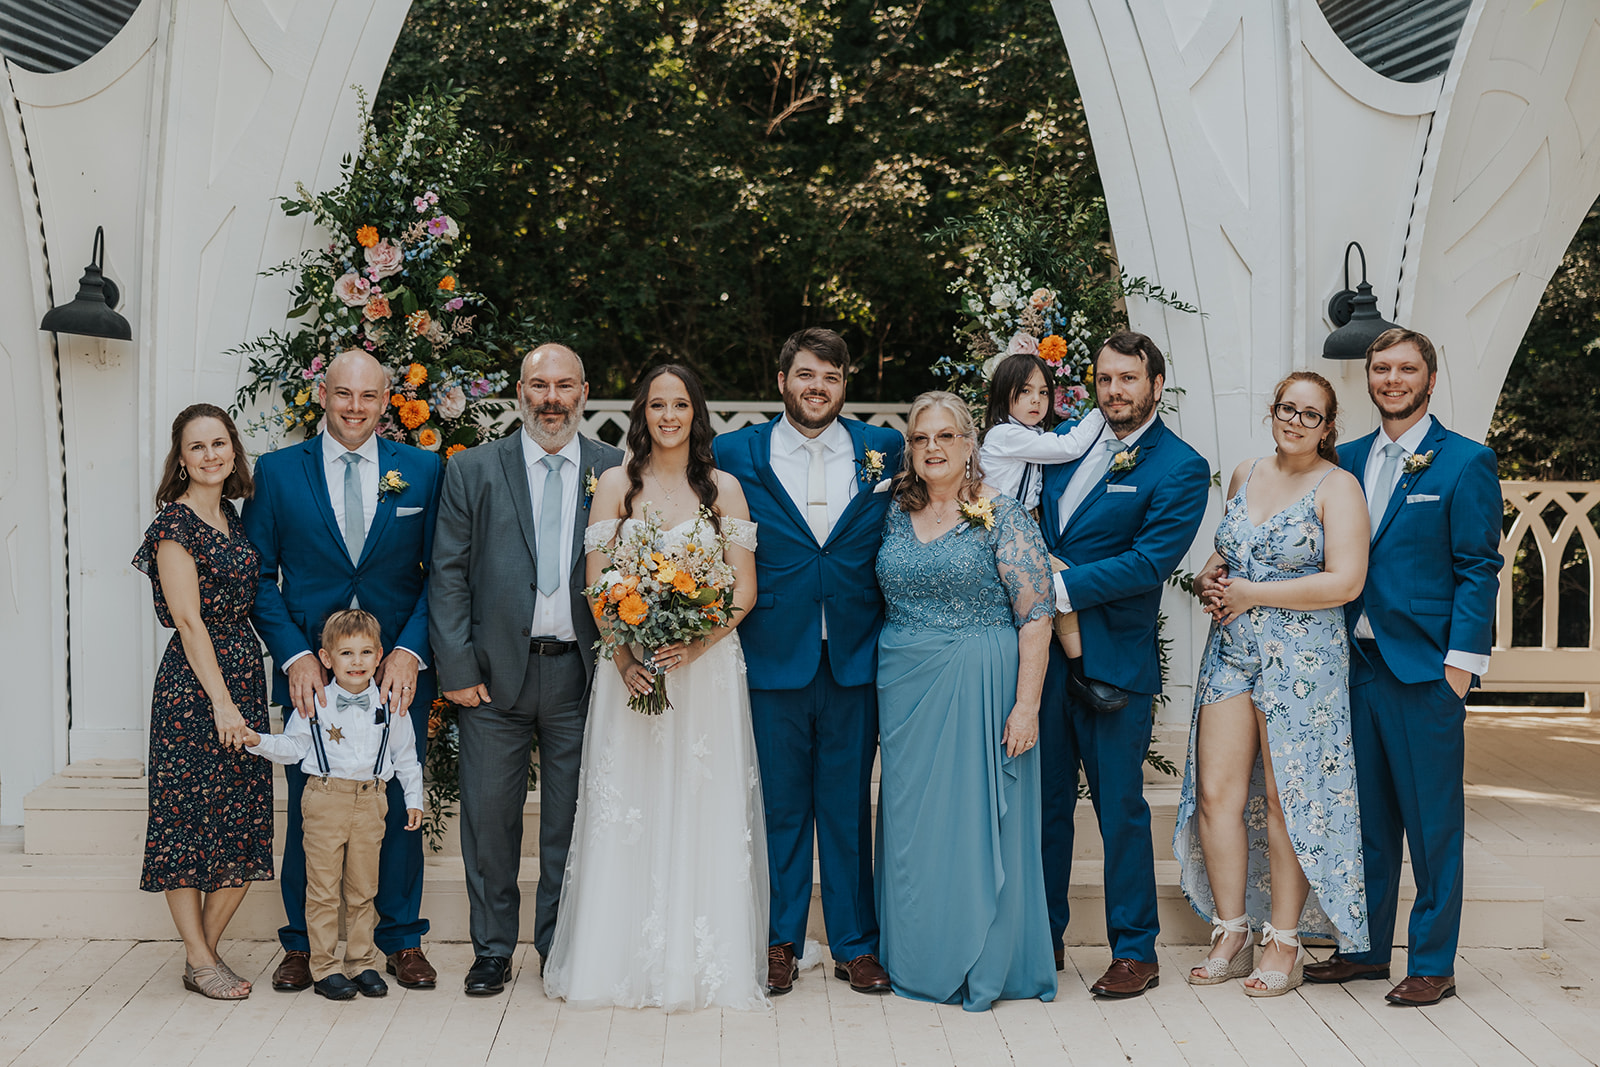 A family photo of the bride and grooms family!